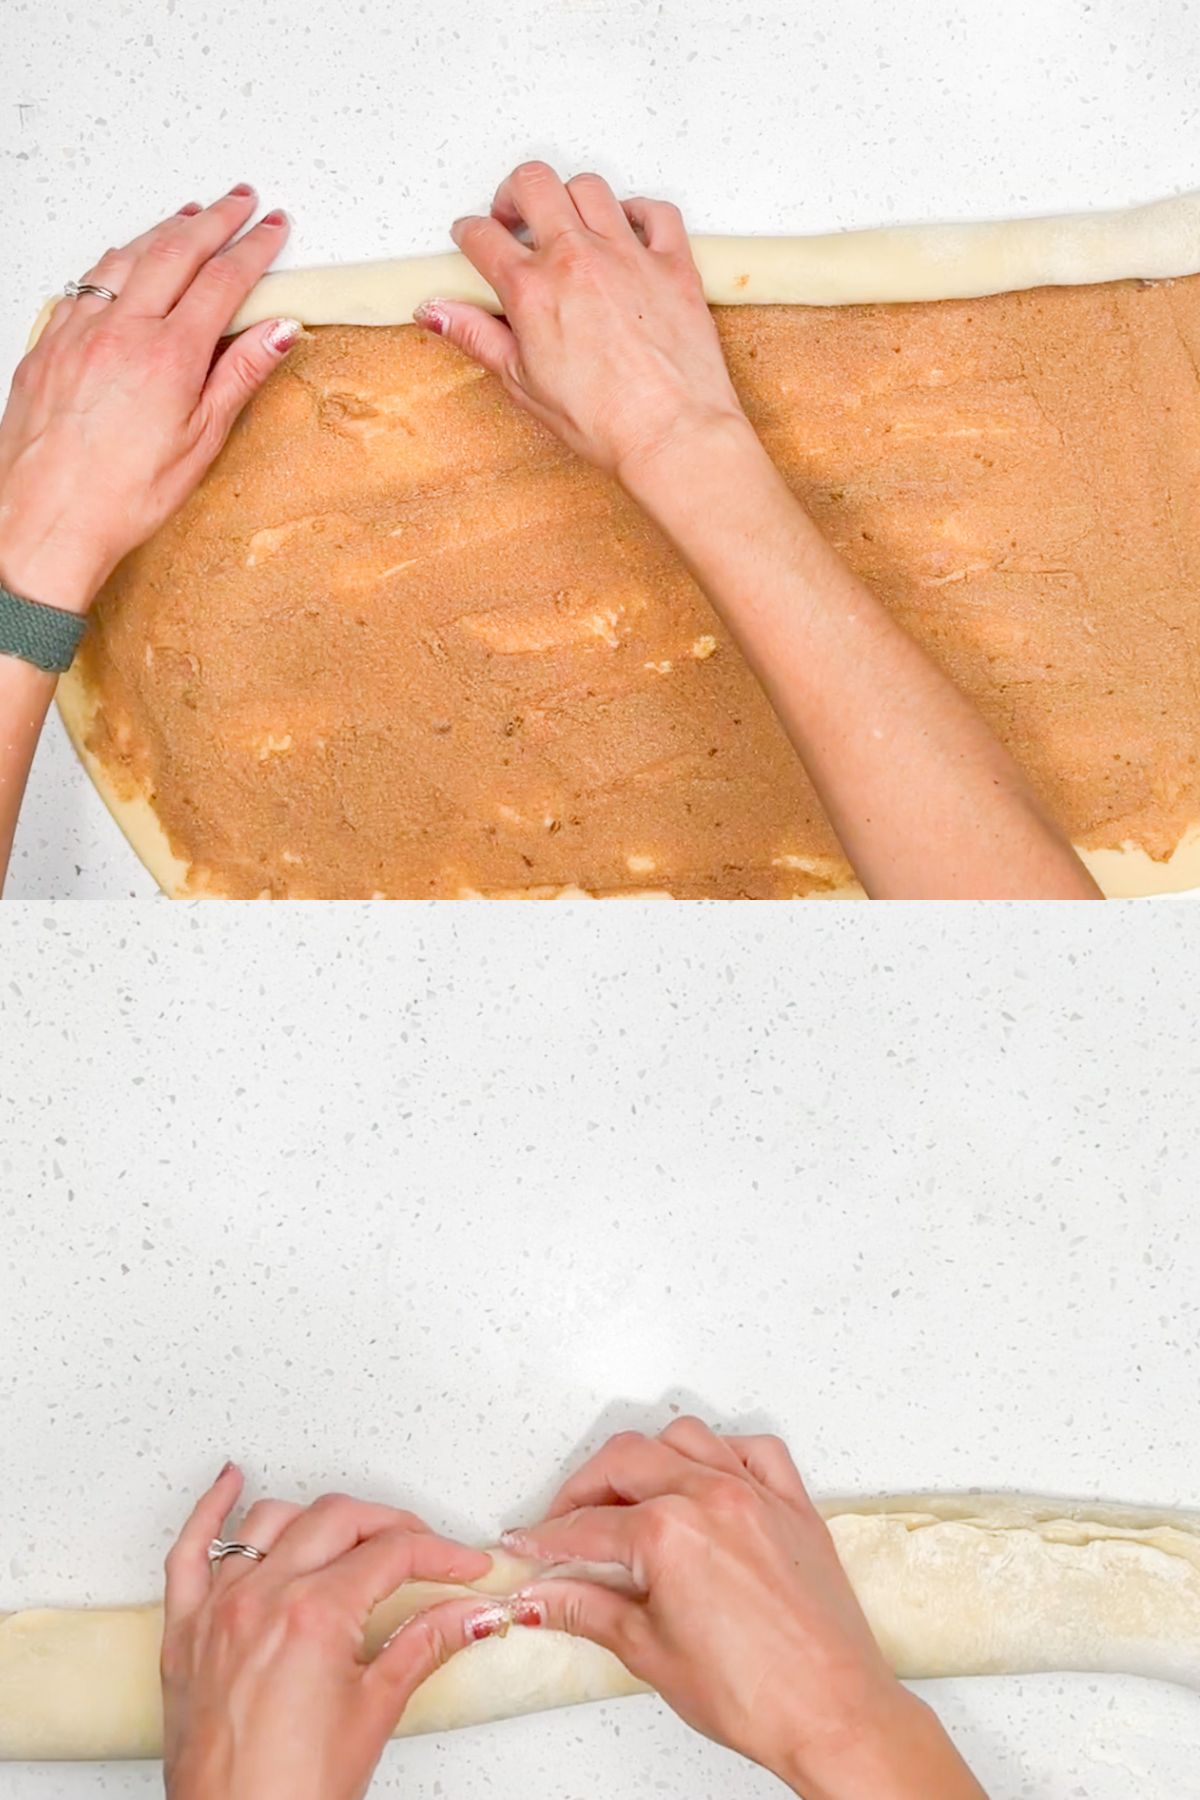 Two hands rolling up cinnamon rolls dough and pinching it closed.